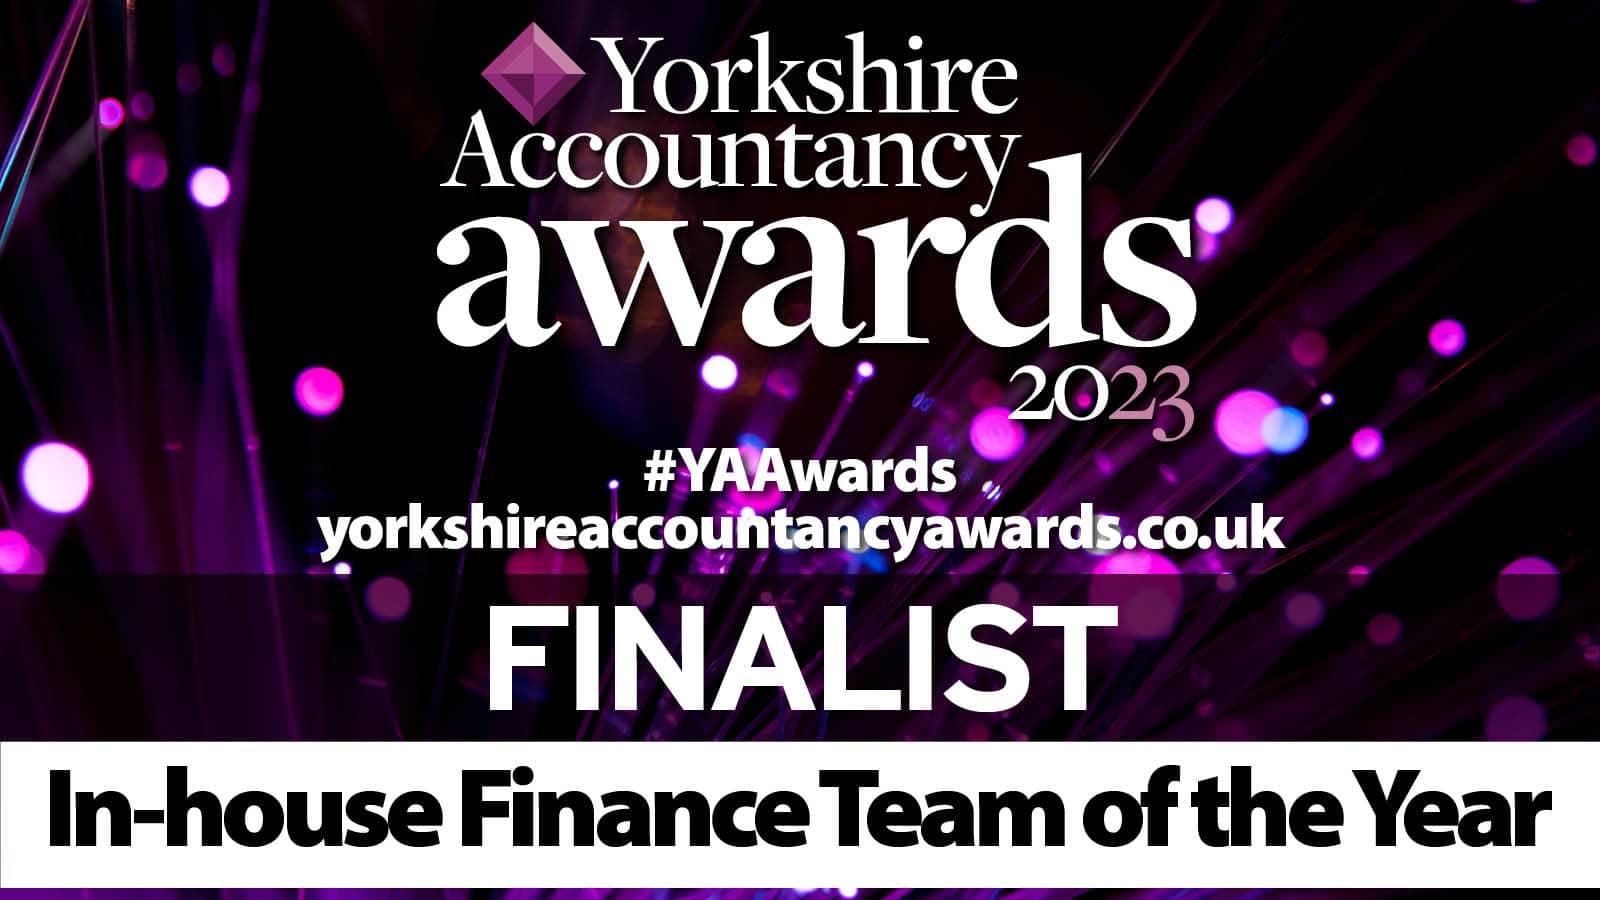 Parklane Plowden shortlisted for the Yorkshire Accountancy Awards 2023